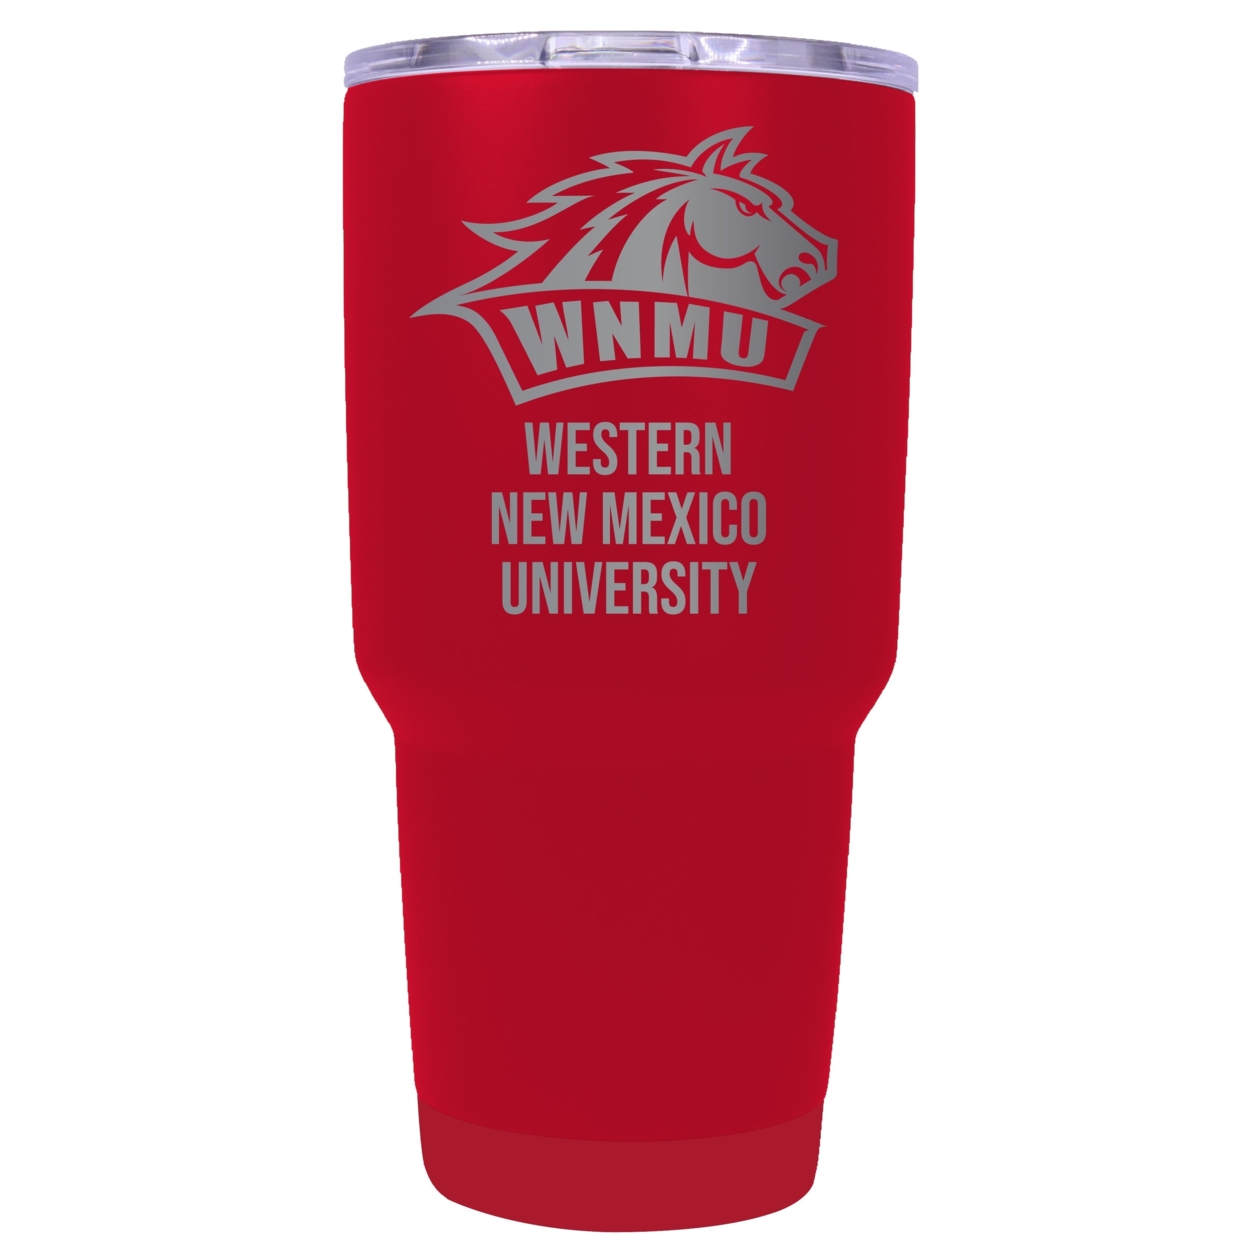 Western New Mexico University 24 Oz Laser Engraved Stainless Steel Insulated Tumbler - Choose Your Color. - Red